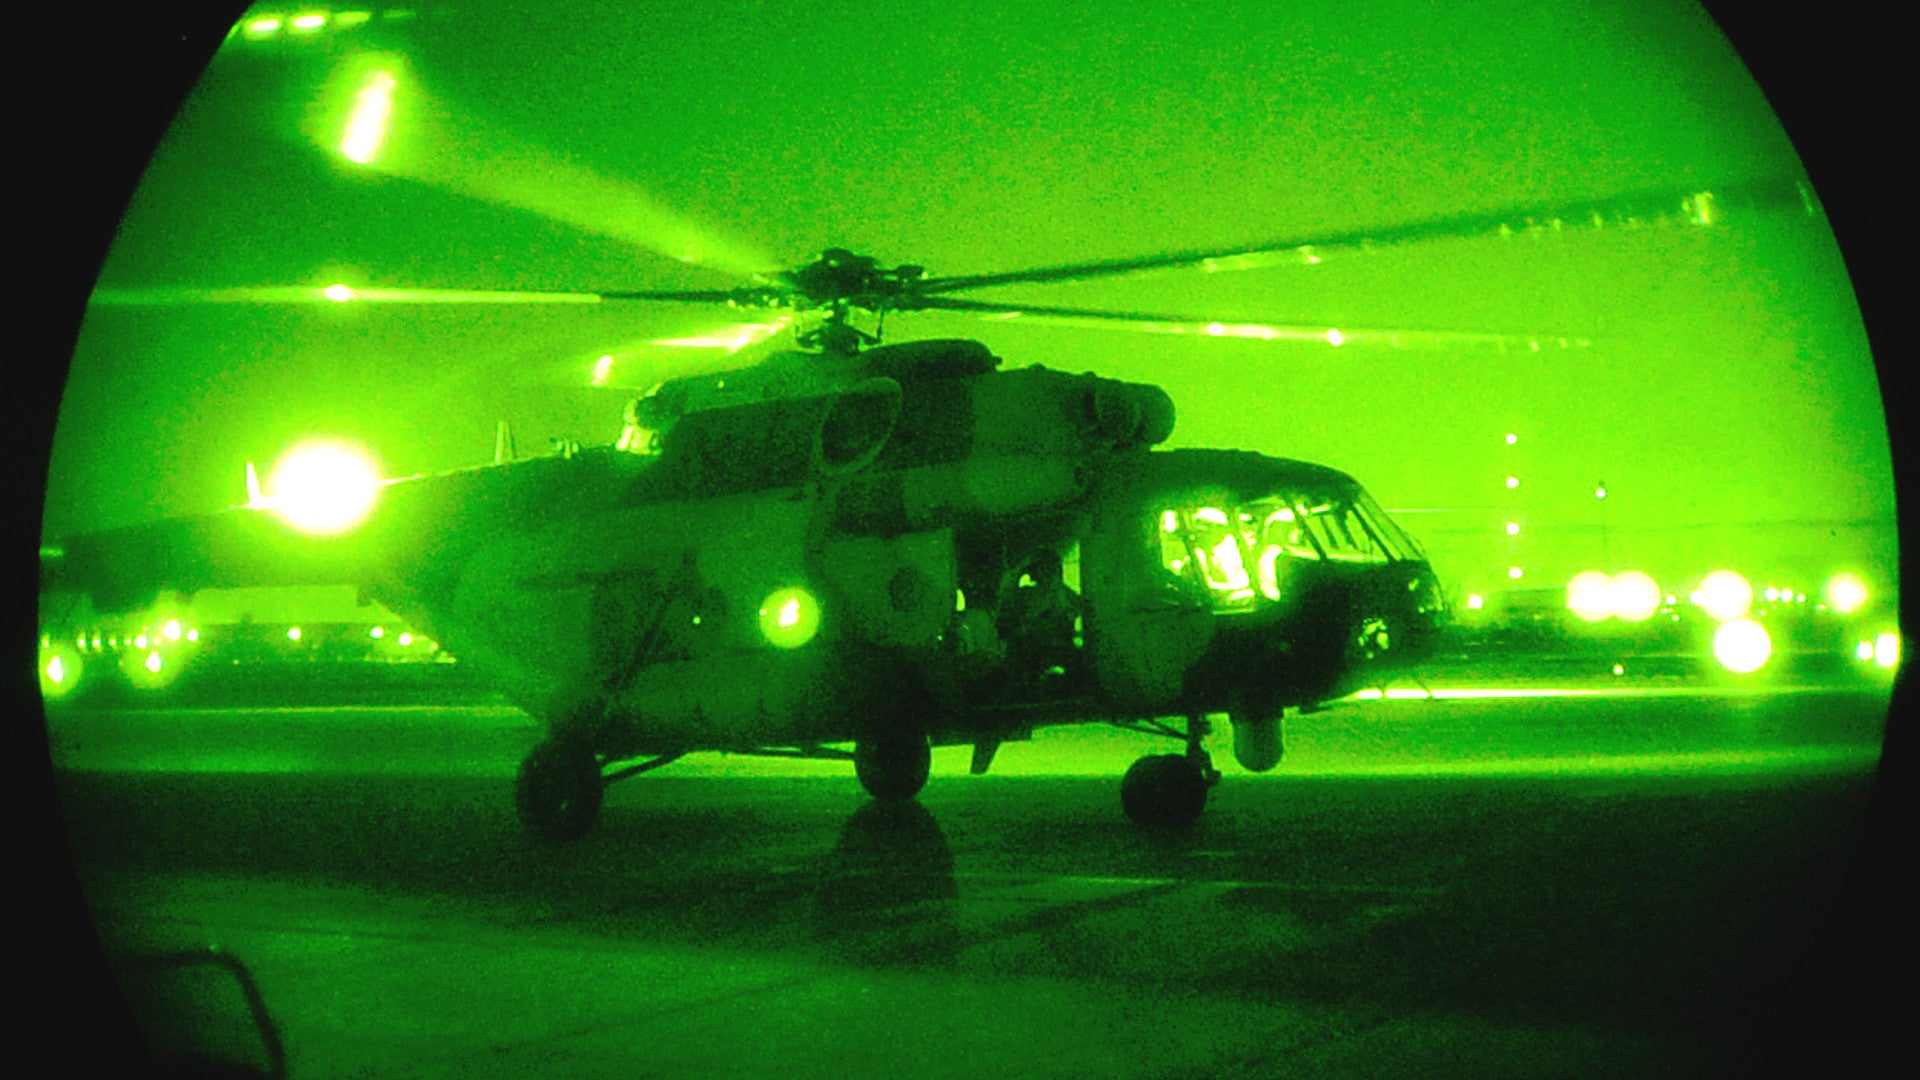 Russia Claims US Coalition “Mystery Helicopters” Supplying Arms To ISIS In Afghanistan